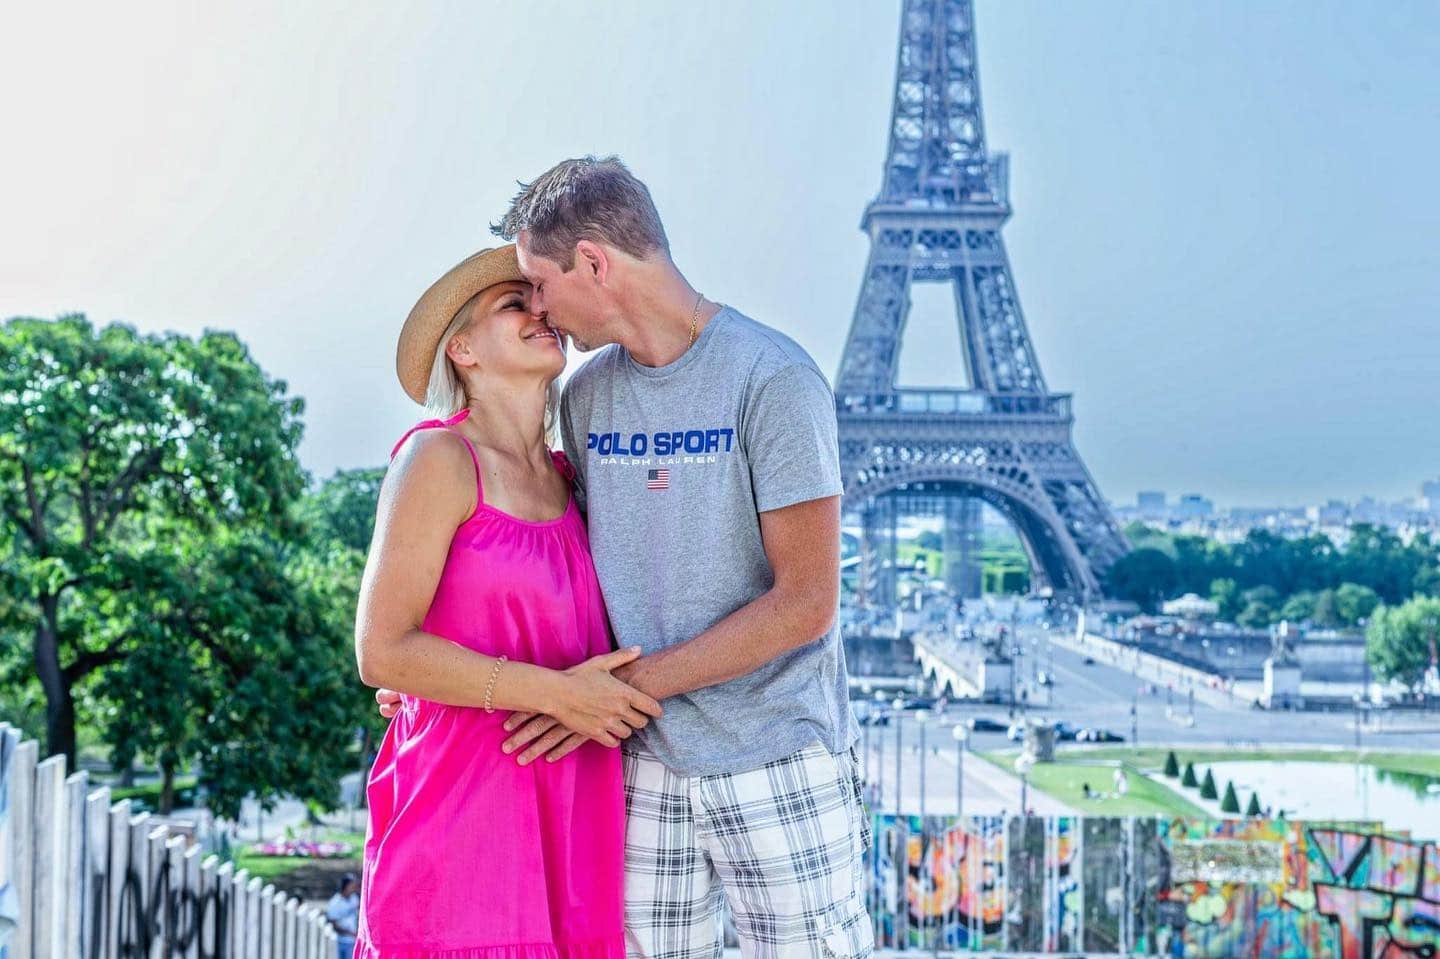 Summer in Paris is always a good idea!
A perfect set up to propose 💍your loved one.
Beautiful view of Eiffet Tower🗼 😍. 
.
We will capture 📸 some unforgettable moments of your proposal.
.
.
.
.
Dm for booking 📩
www.chouettelove.com
event@chouettelove.com
 📞+33613905875 Liya
. ⁠
#ceremonize #engaged⁠ #truelove ⁠
#putaringonit⁠ #weddingquotes⁠
#weddingmemes #weddingtip #weddingtips⁠
#weddingplanning⁠
#weddingmemes #weddingparis⁠
#elopementinspiration⁠
#pariselopementwedding⁠ #pariselopement⁠
#marrymeinparis⁠ #weddingplannerparis⁠
#destinationweddingparis⁠ #elopeinparis⁠
#parisweddingphoto⁠ #elopementplanner⁠
#weddingplanner #weddingplannerparis⁠
#elopementinspo⁠ #elopementinparis⁠
#elopetoparis⁠ #elopement #shesaidyes💍 #destinationproposal